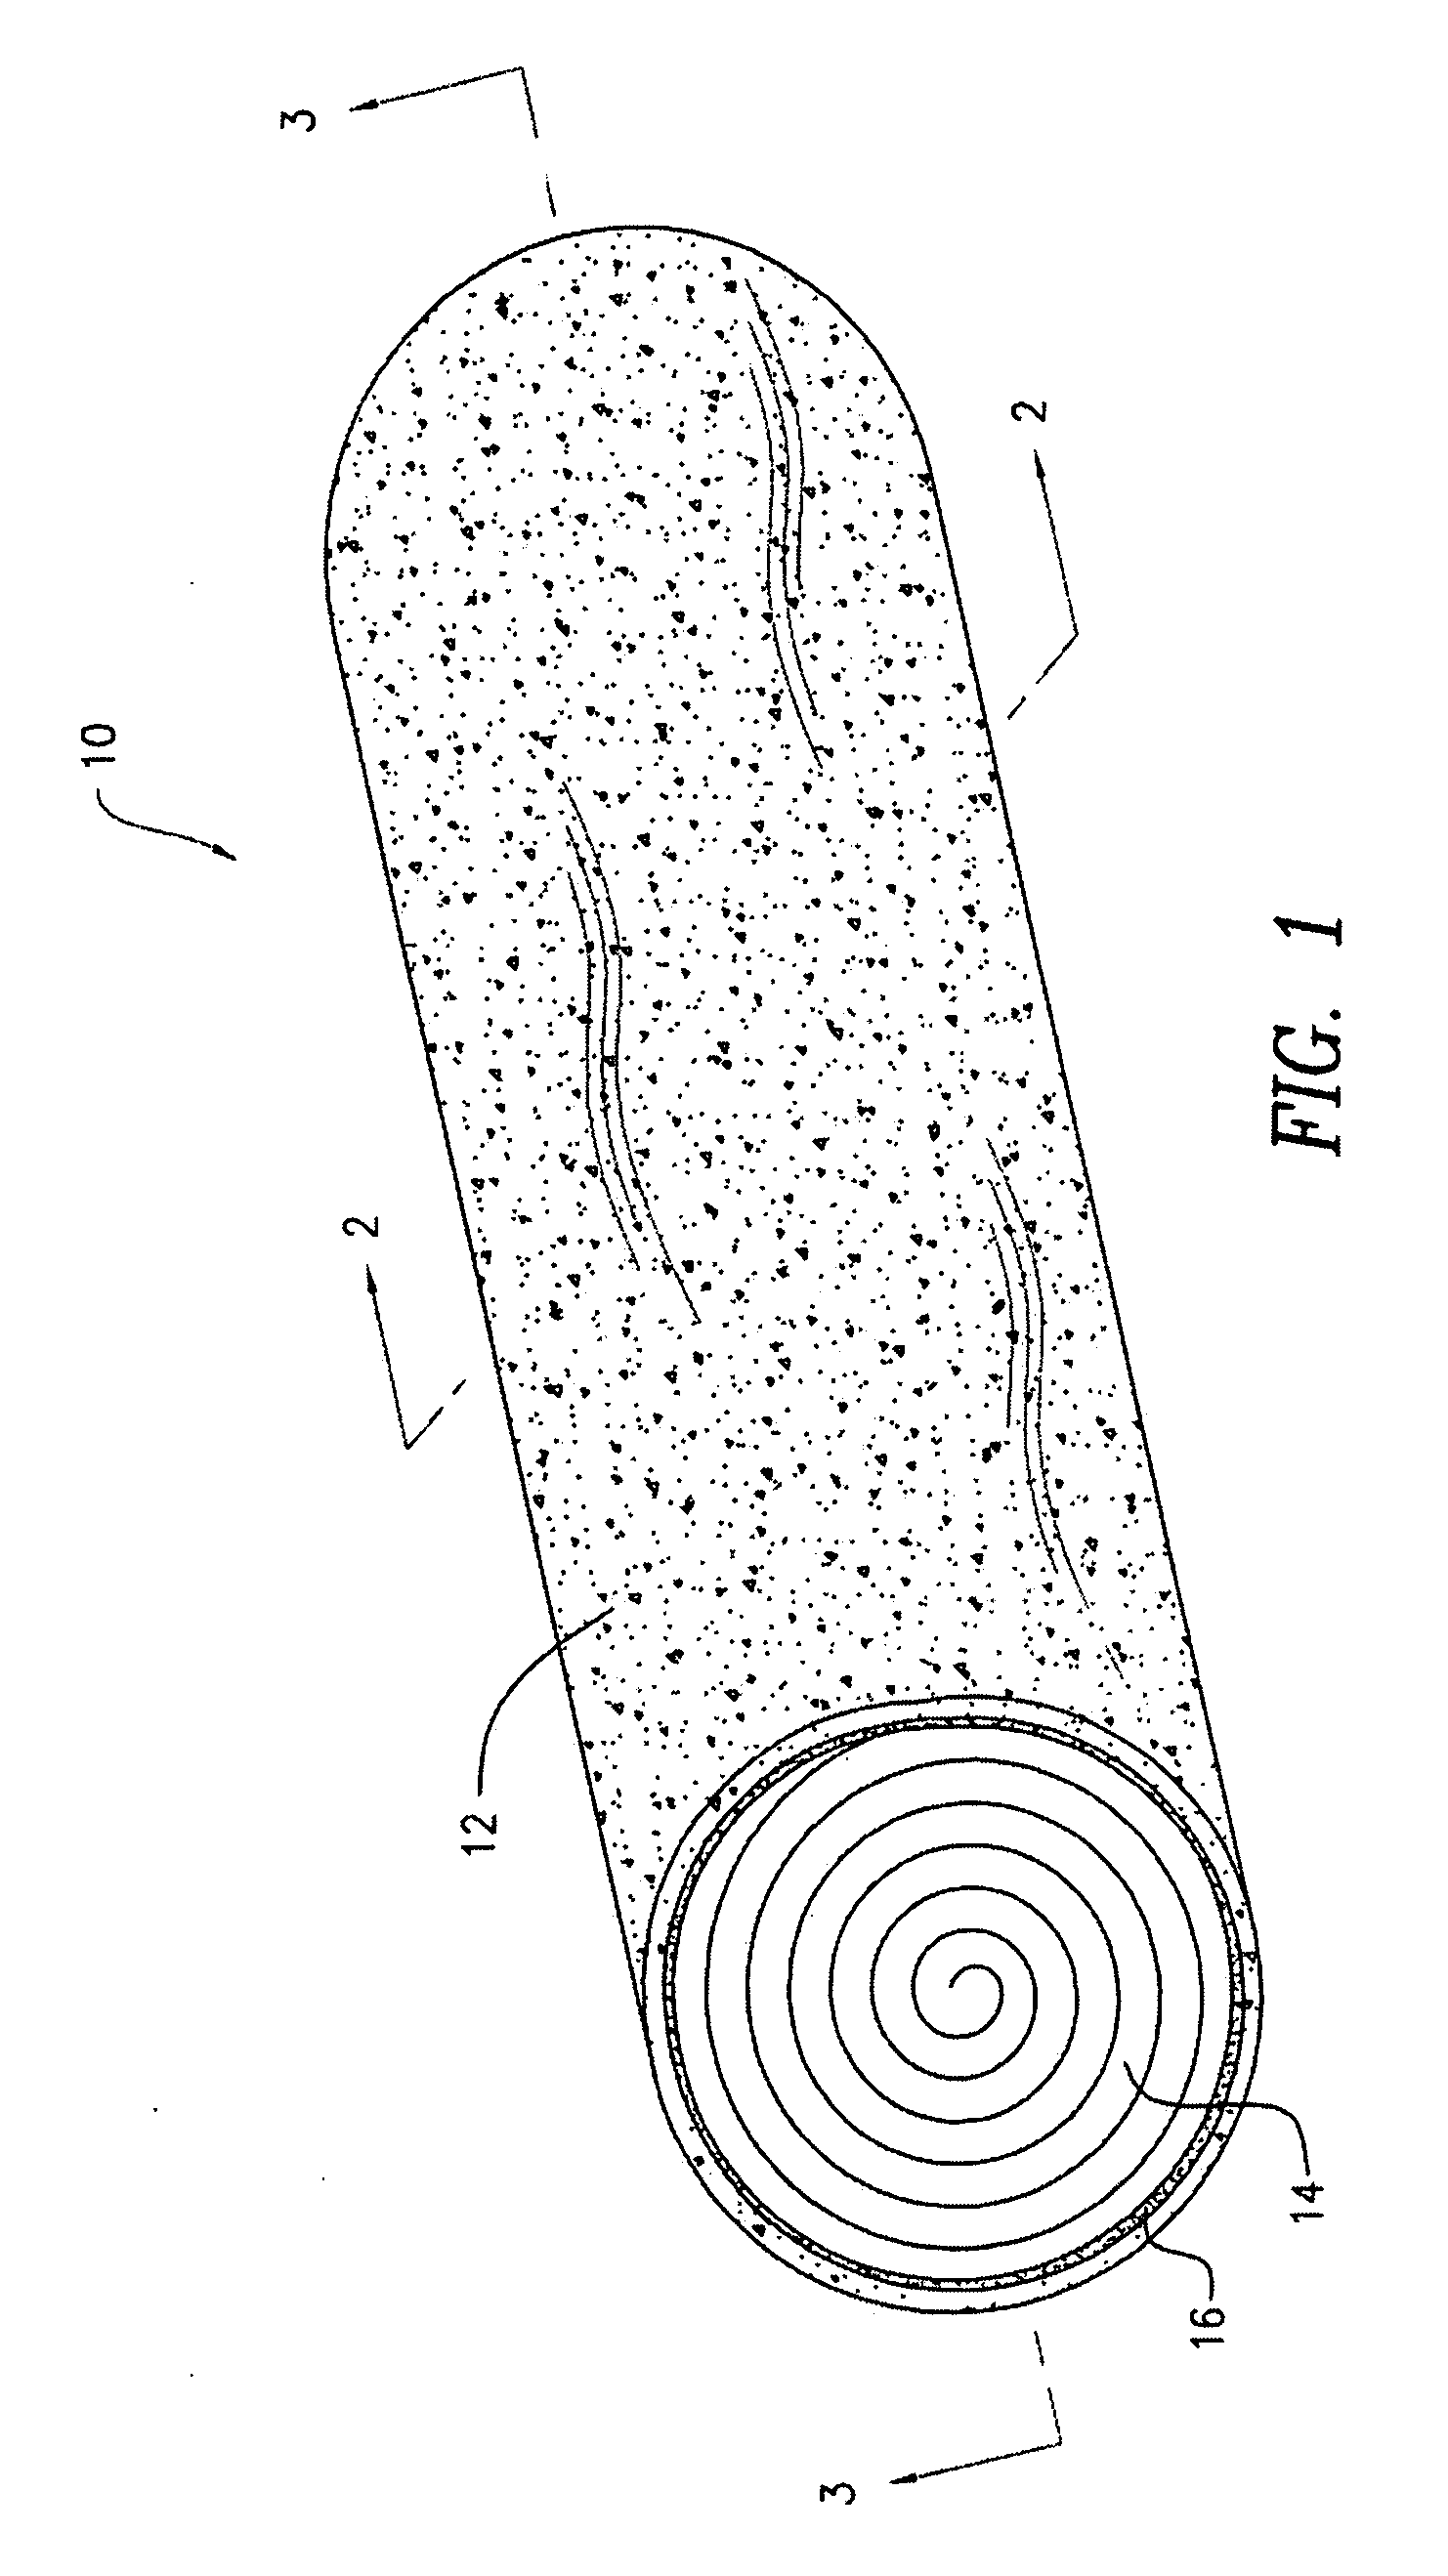 Rolled pet treat and process for making same